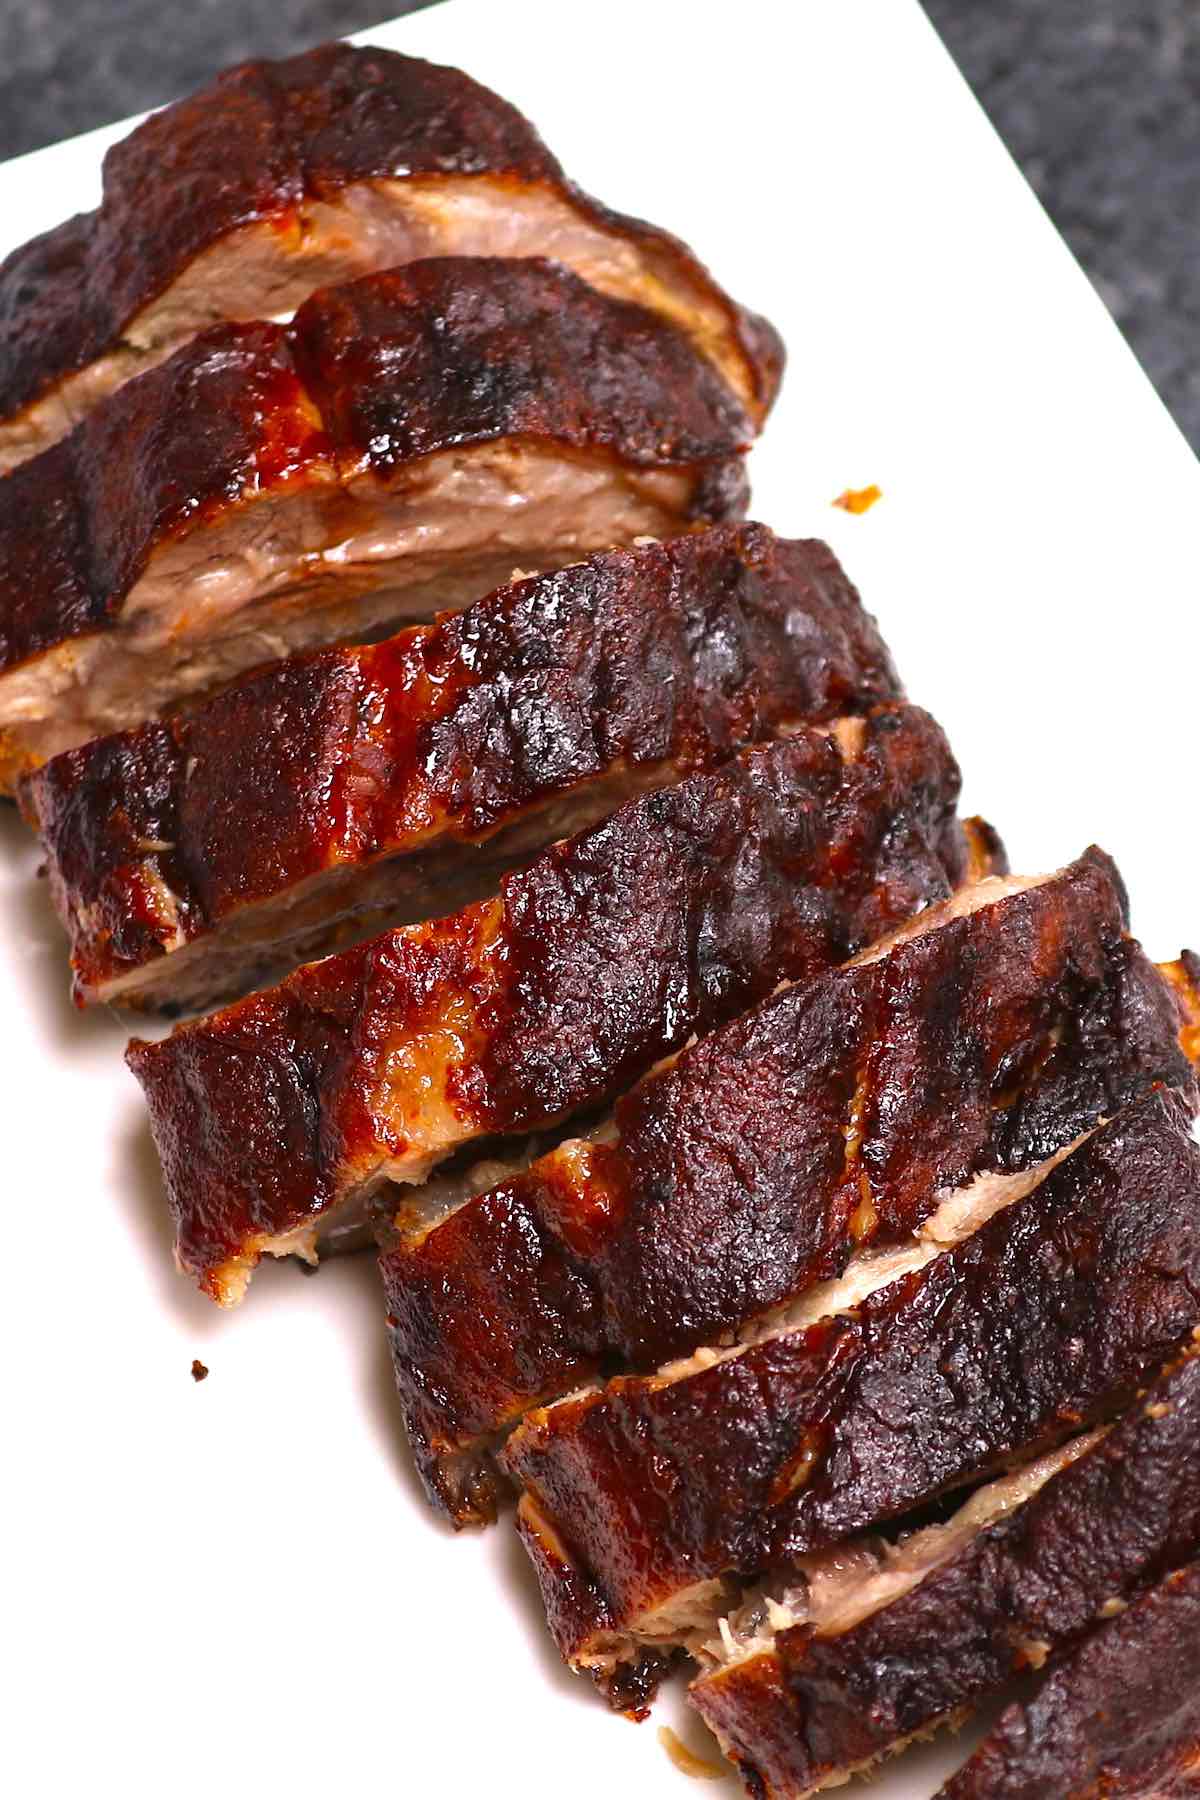 Overhead view of 3 2 1 ribs on a serving platter after having been cut into individual sections